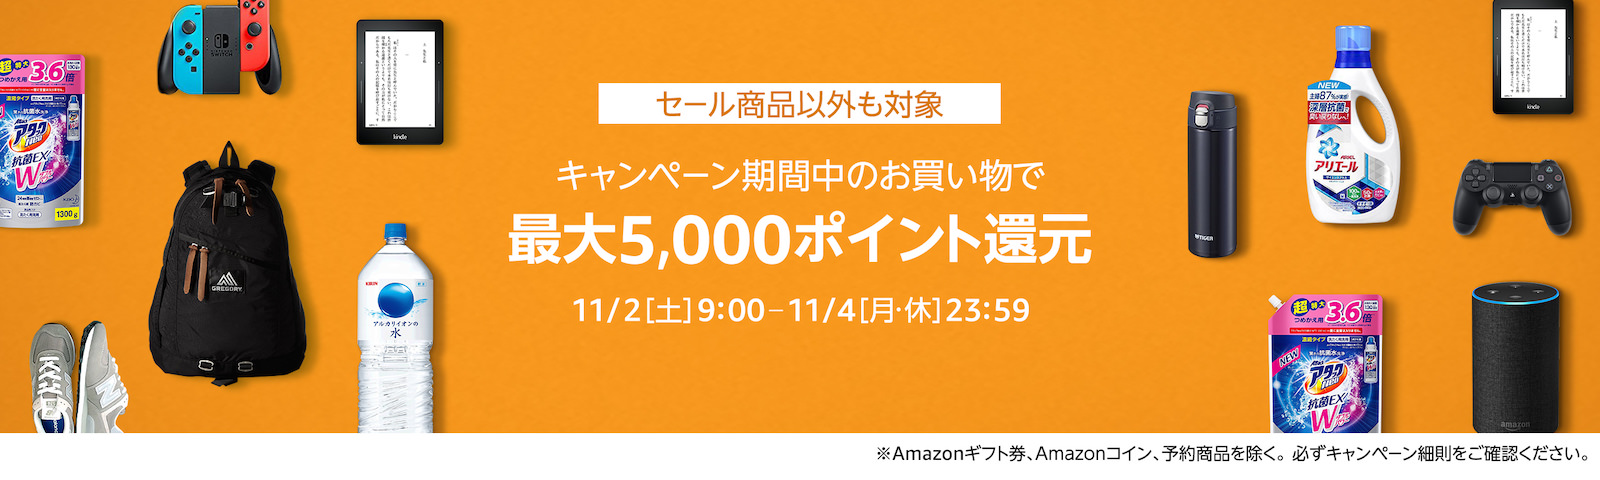 Amazon-Timesale-pointback-campaign-201911.jpg